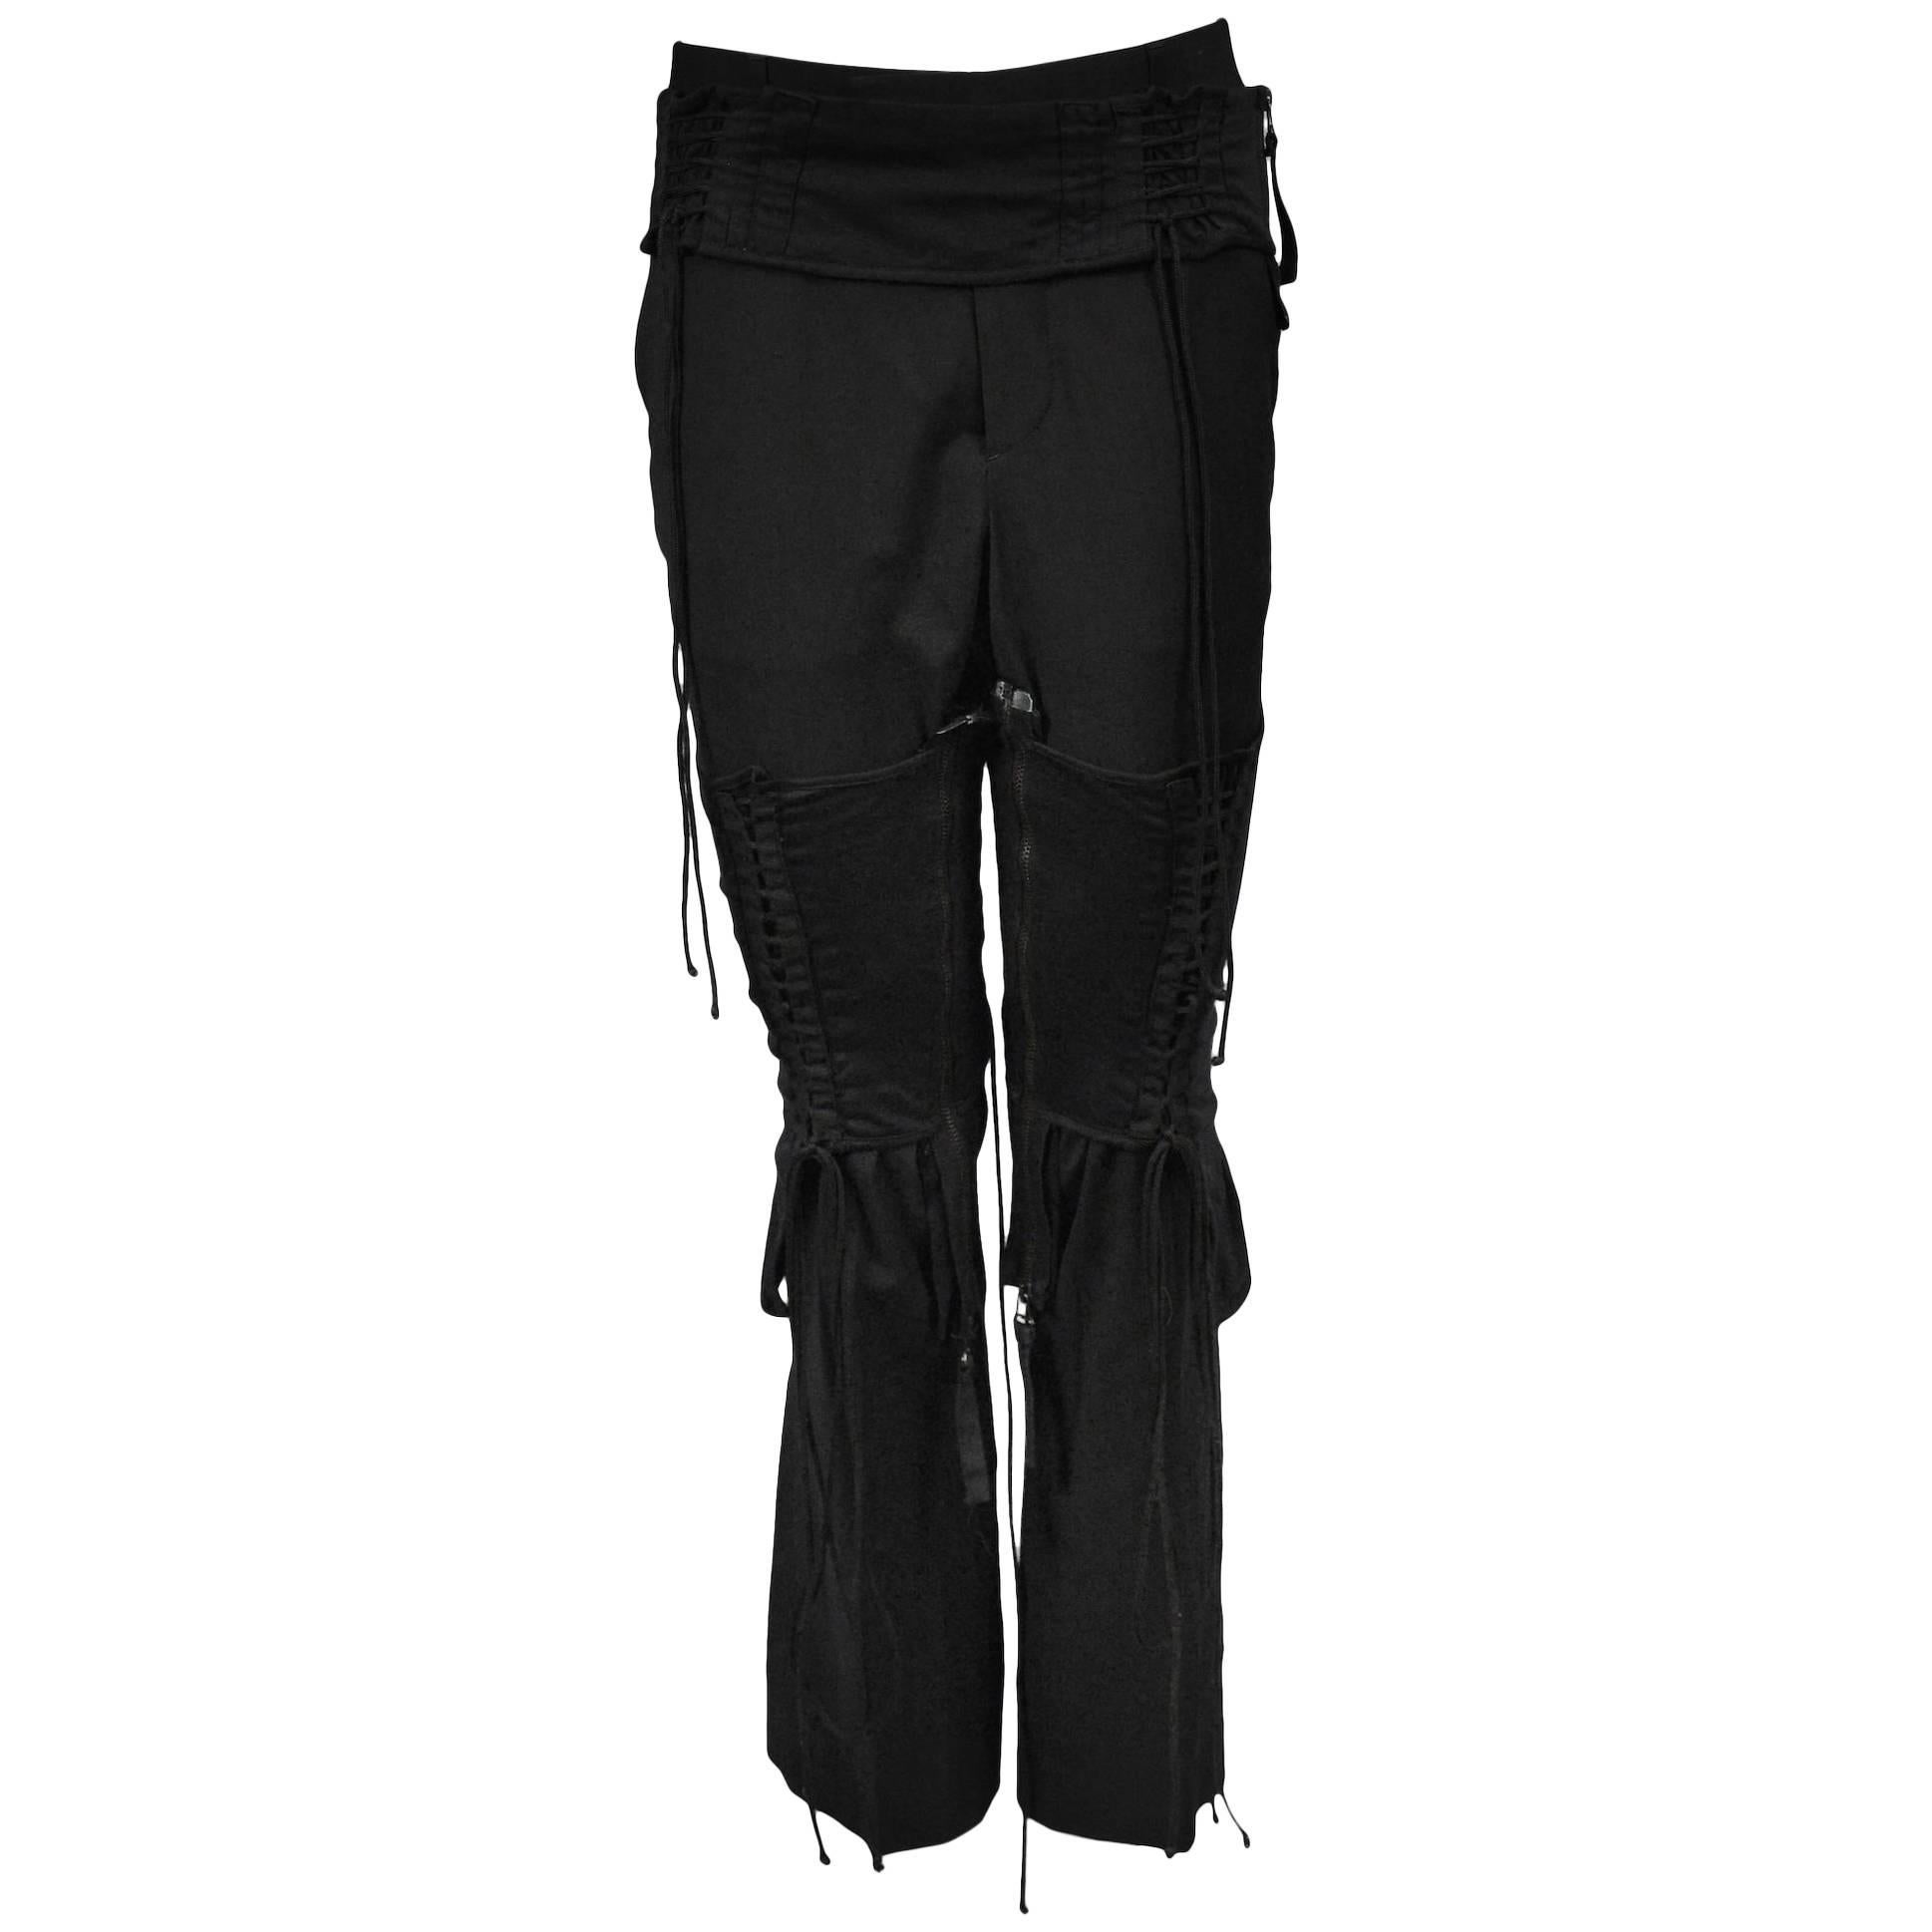 Discover more than 120 helmut lang pants sale latest - in.eteachers